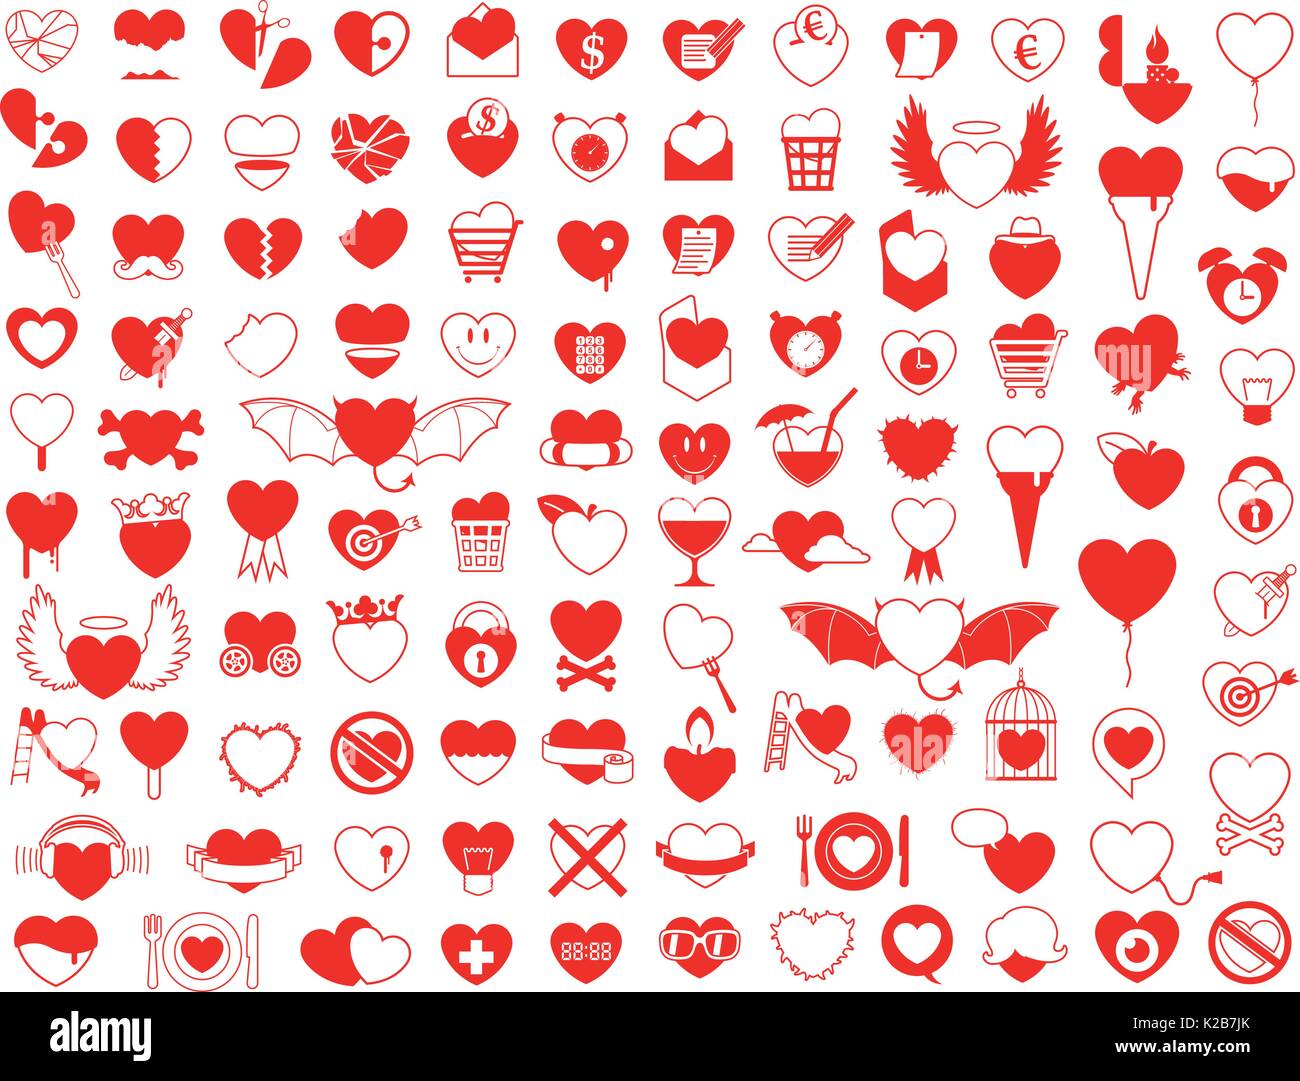 Big collection of red silhouette vector heart icons covering love, romance, objects, broken hearts and design elements - illustration Stock Vector